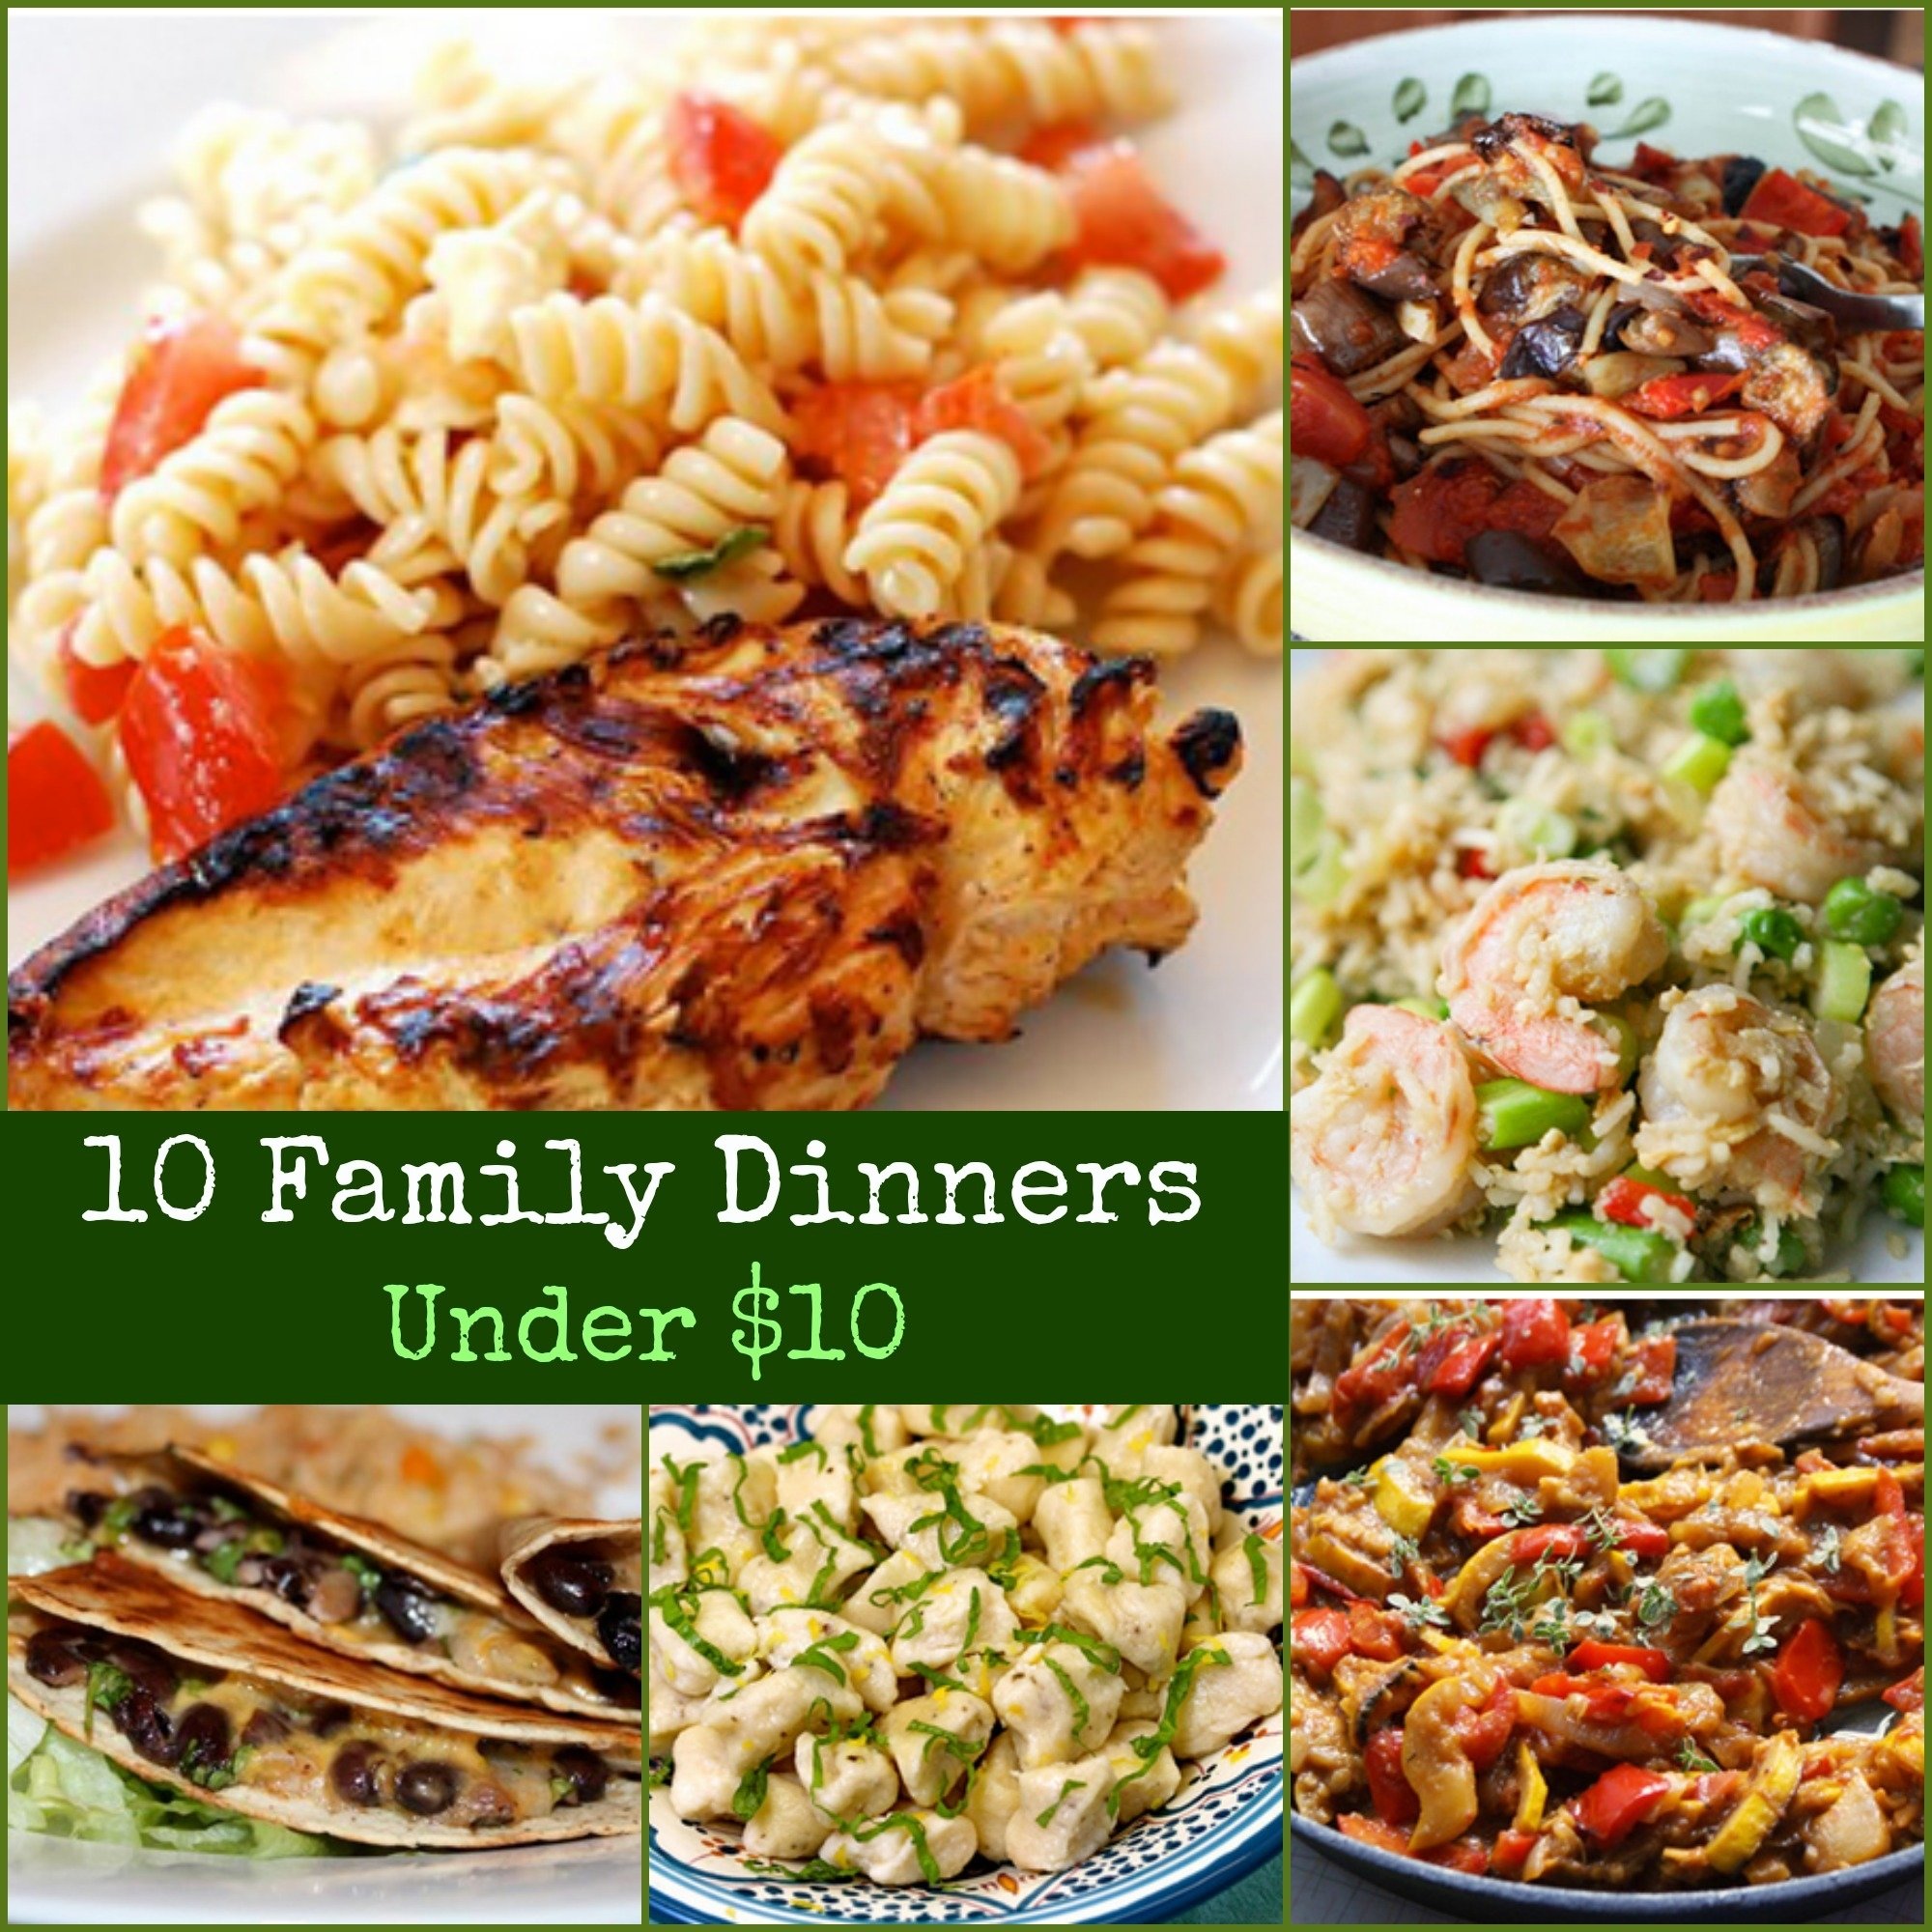 15 Extremely Easy Dinner Recipes for Two Cheap - Best Product Reviews